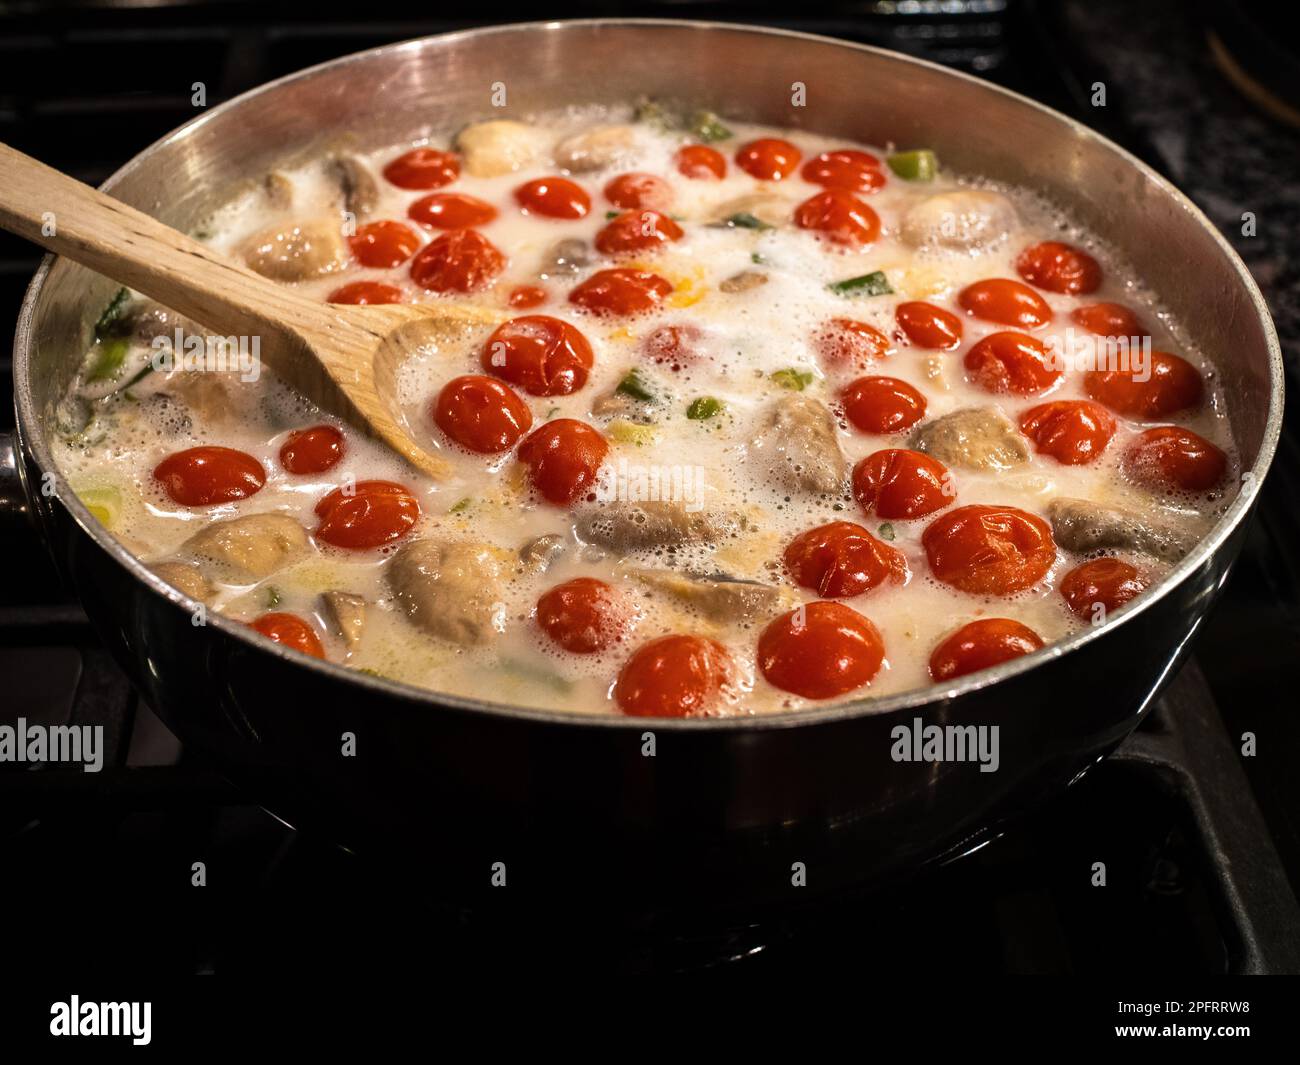 Delicious Thai coconut soup with tomatoes in a silvery pot with wooden utensil. Stock Photo